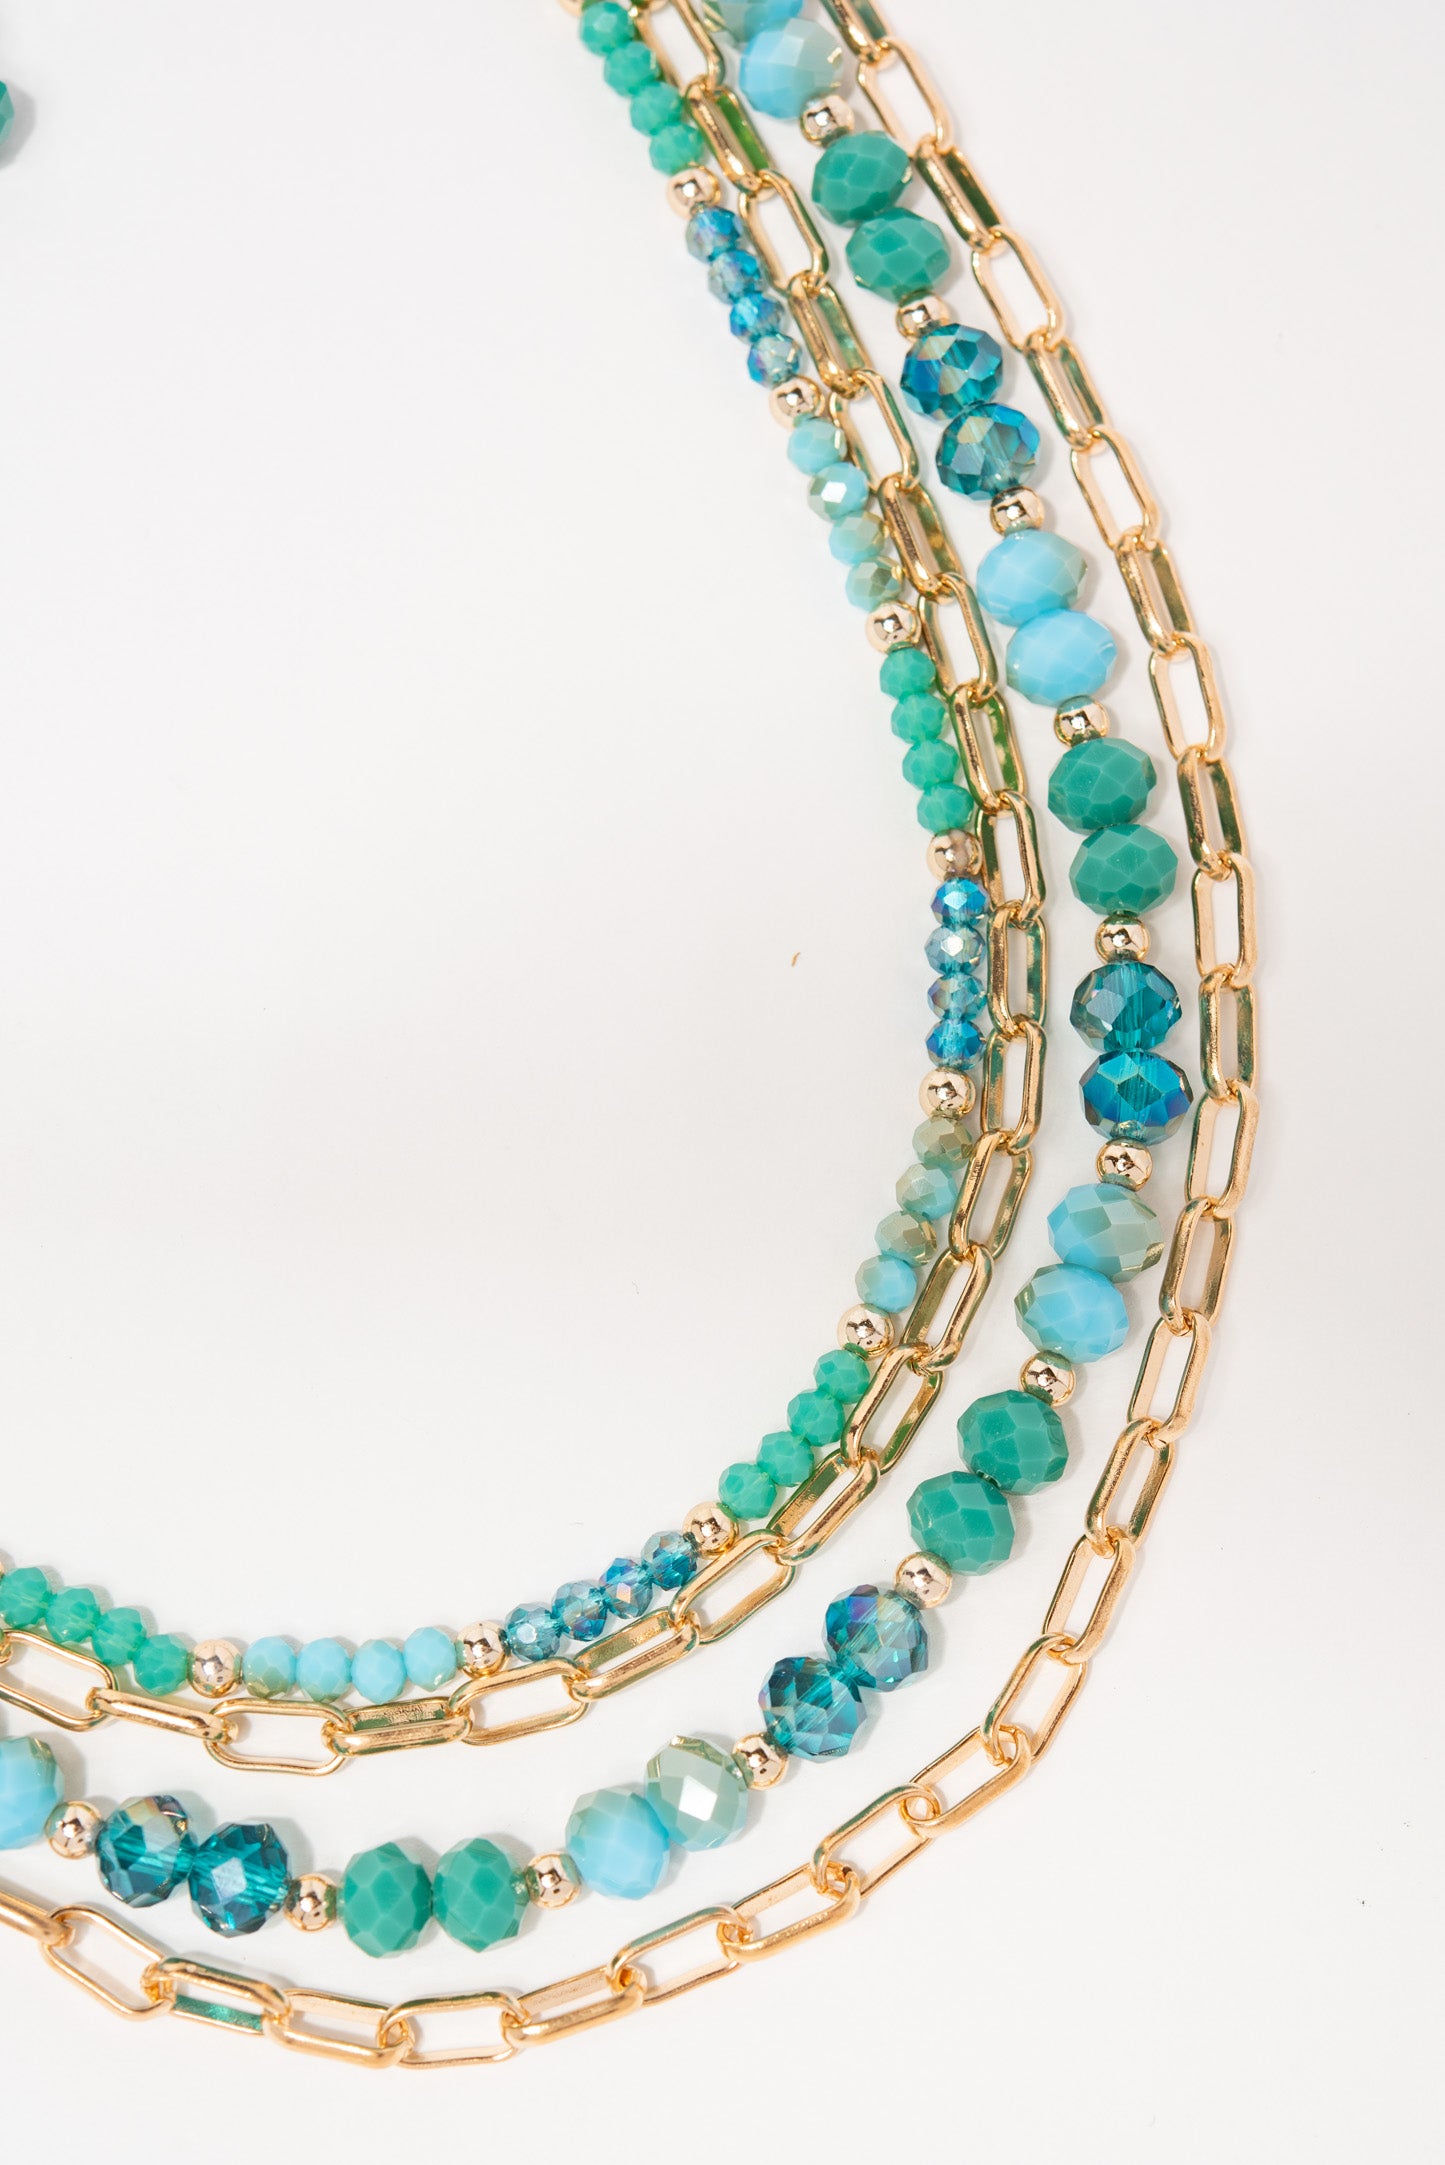 Emily Beaded Paperclip Multi Strand Necklace Set - Turquoise